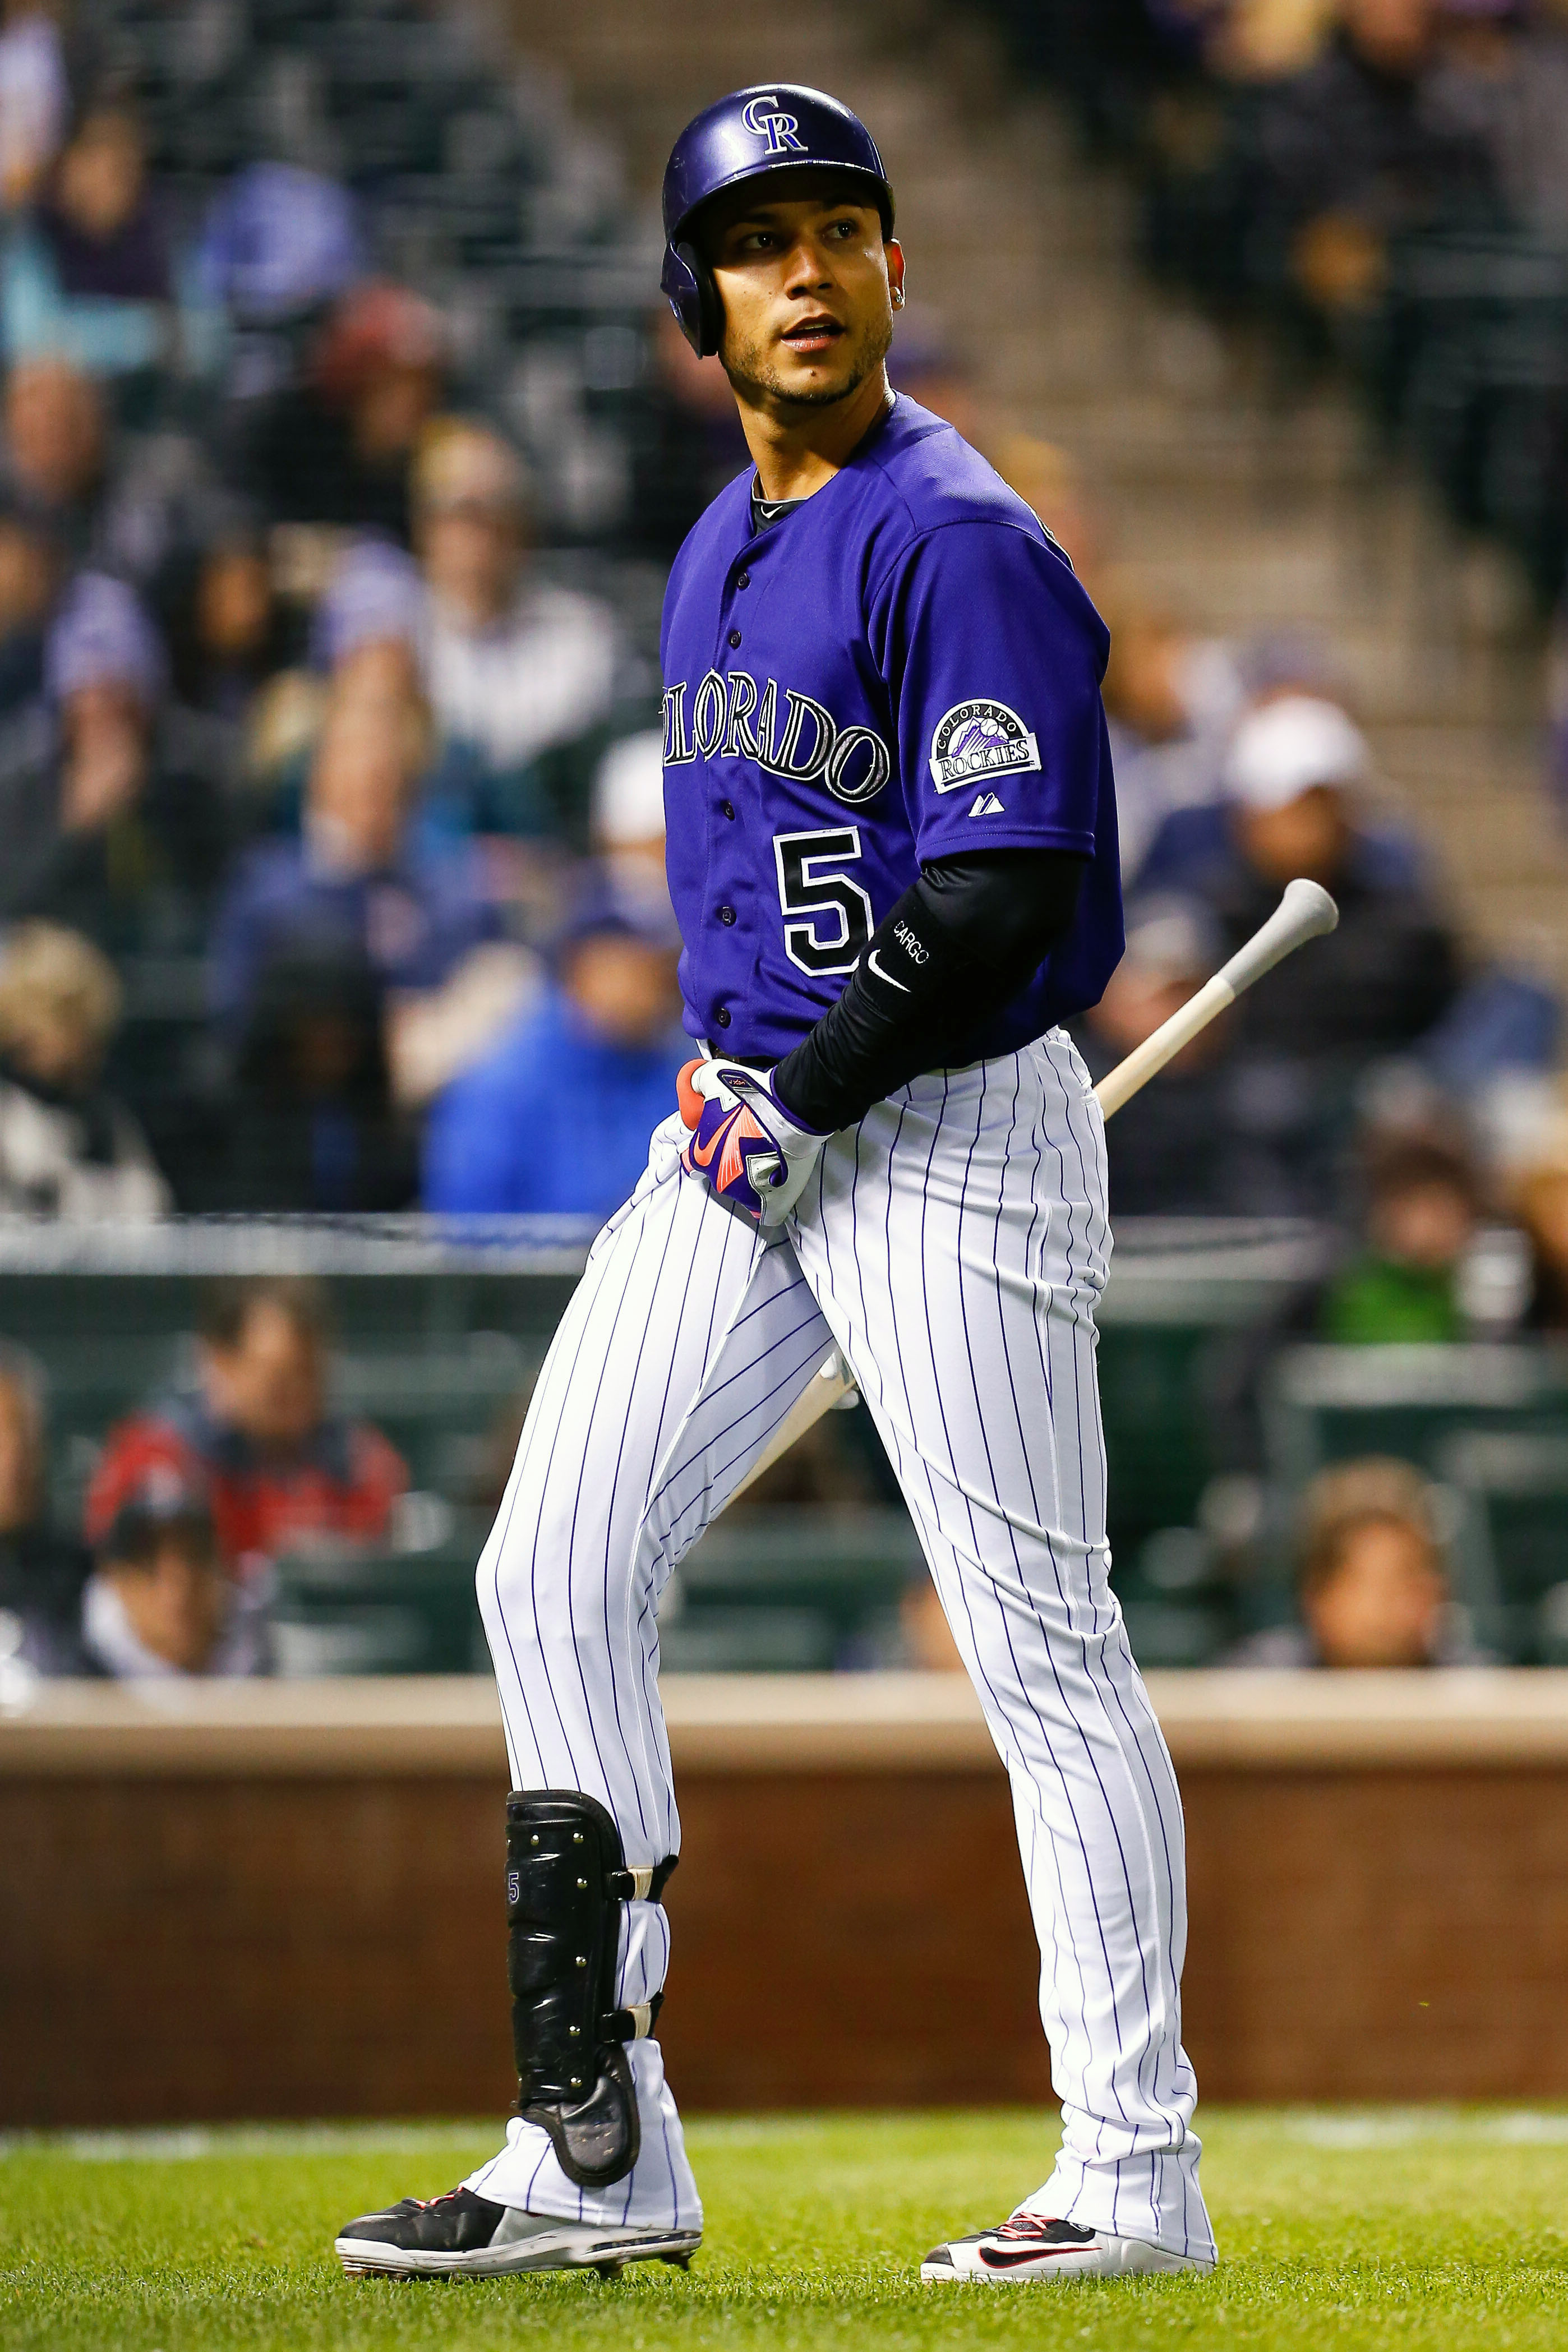 Will Carlos Gonzalez be a dead weight on building the Rockies roster going forward?